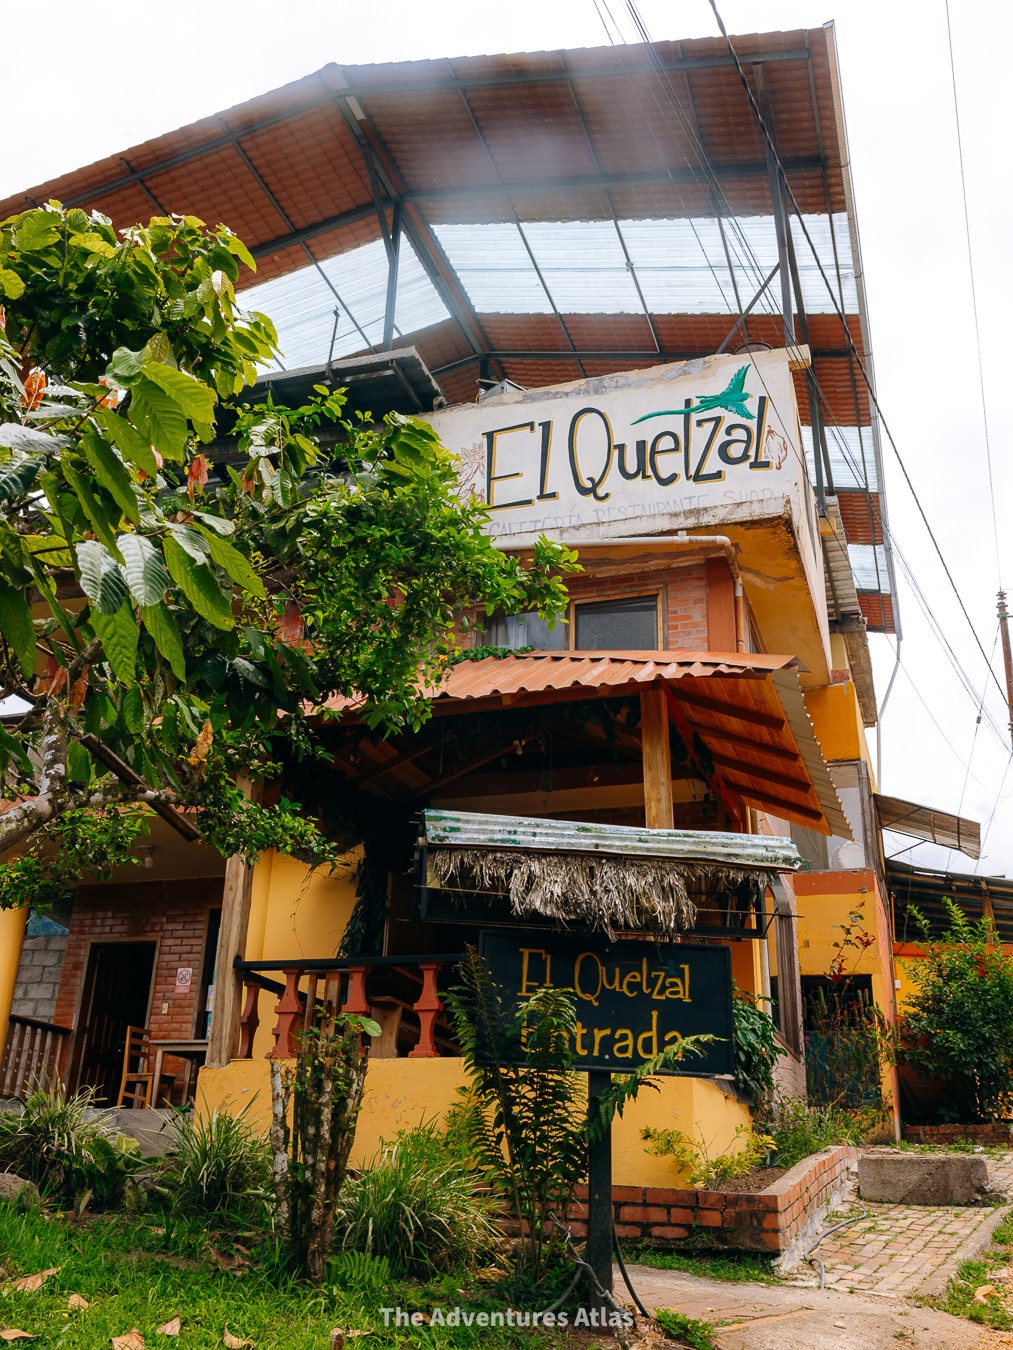 El Quetzal is the best place to eat in Mindo on a 2 week road trip in Ecuador